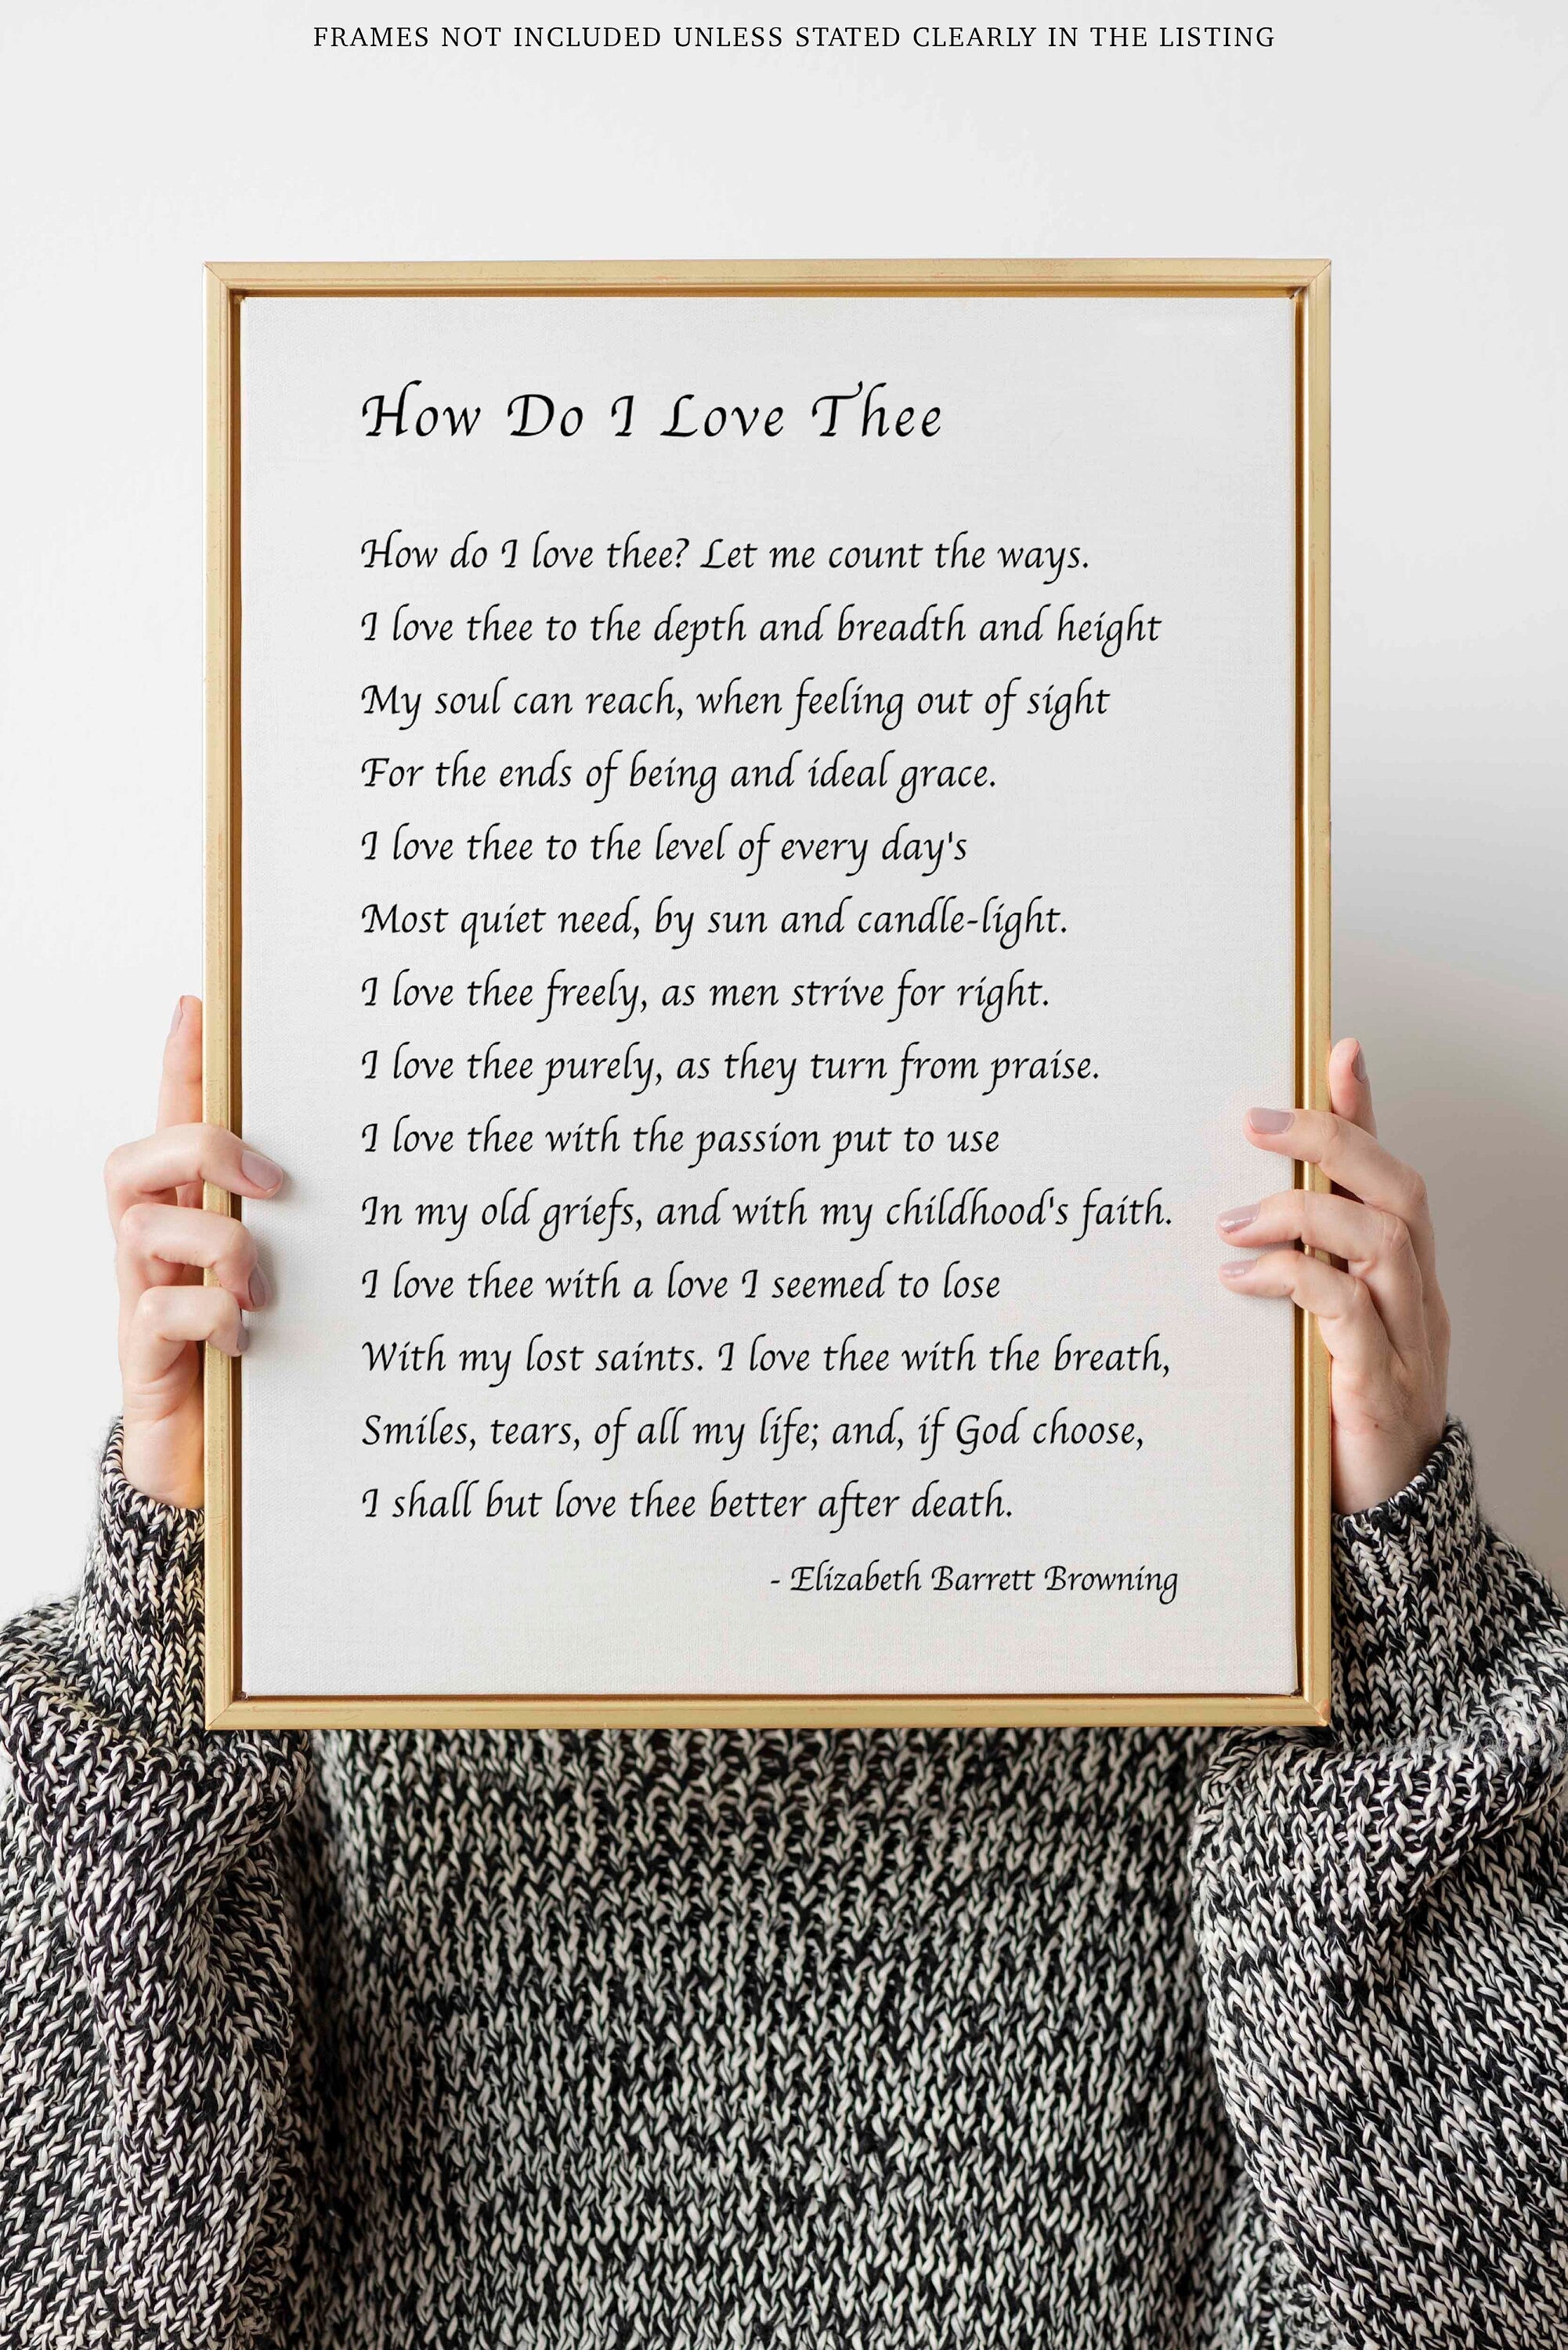 Elizabeth Barrett Browning, How Do I Love Thee Poetry Quote Art